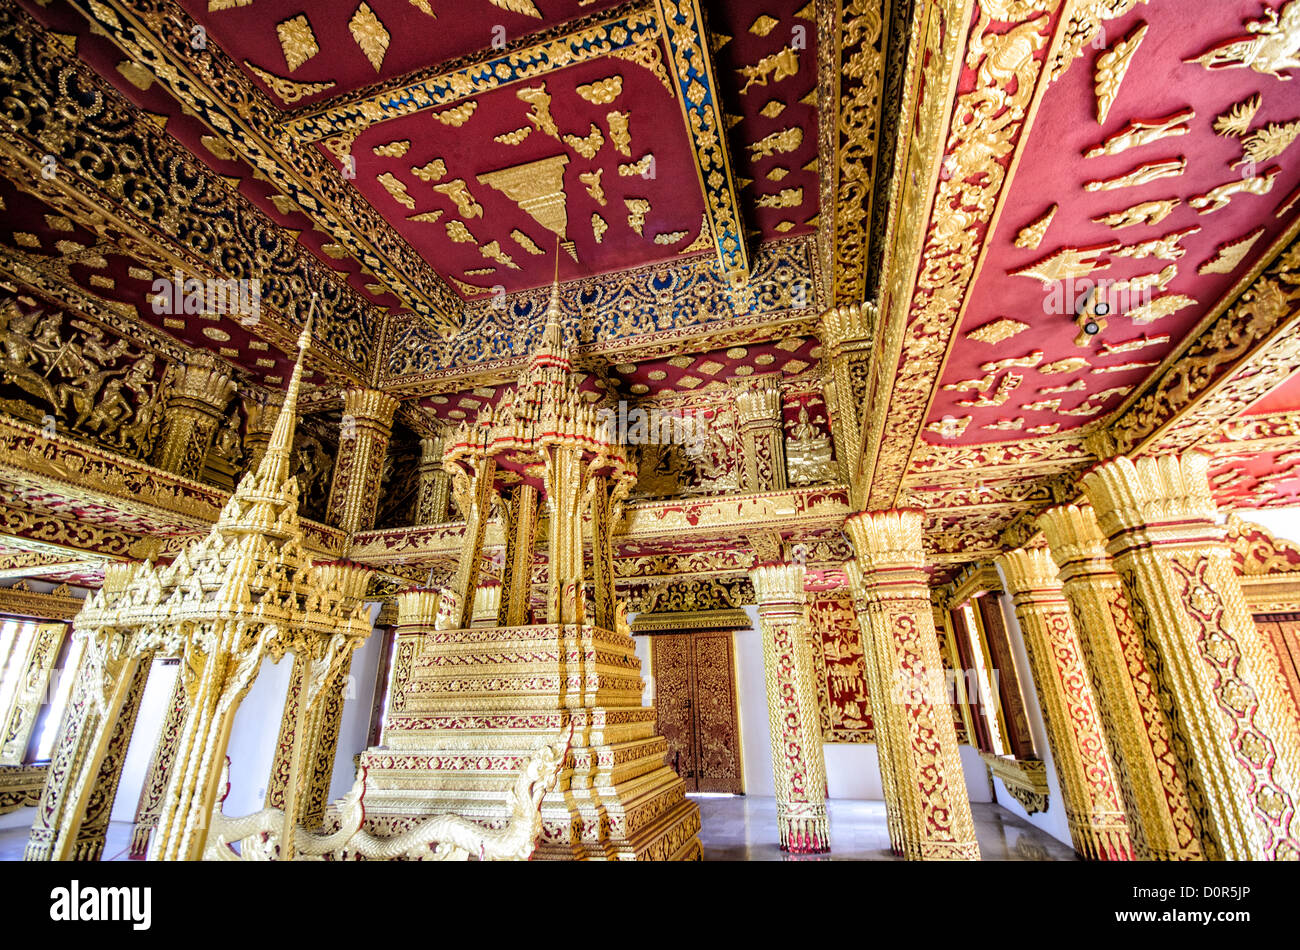 LUANG PRABANG, Laos - The ornate gold and red interior of Haw Pha Bang (or Palace Chapel) at the Royal Palace Museum in Luang Prabang, Laos. The chapel sits at the northeastern corner of the grounds. Construction started in 1963. Stock Photo